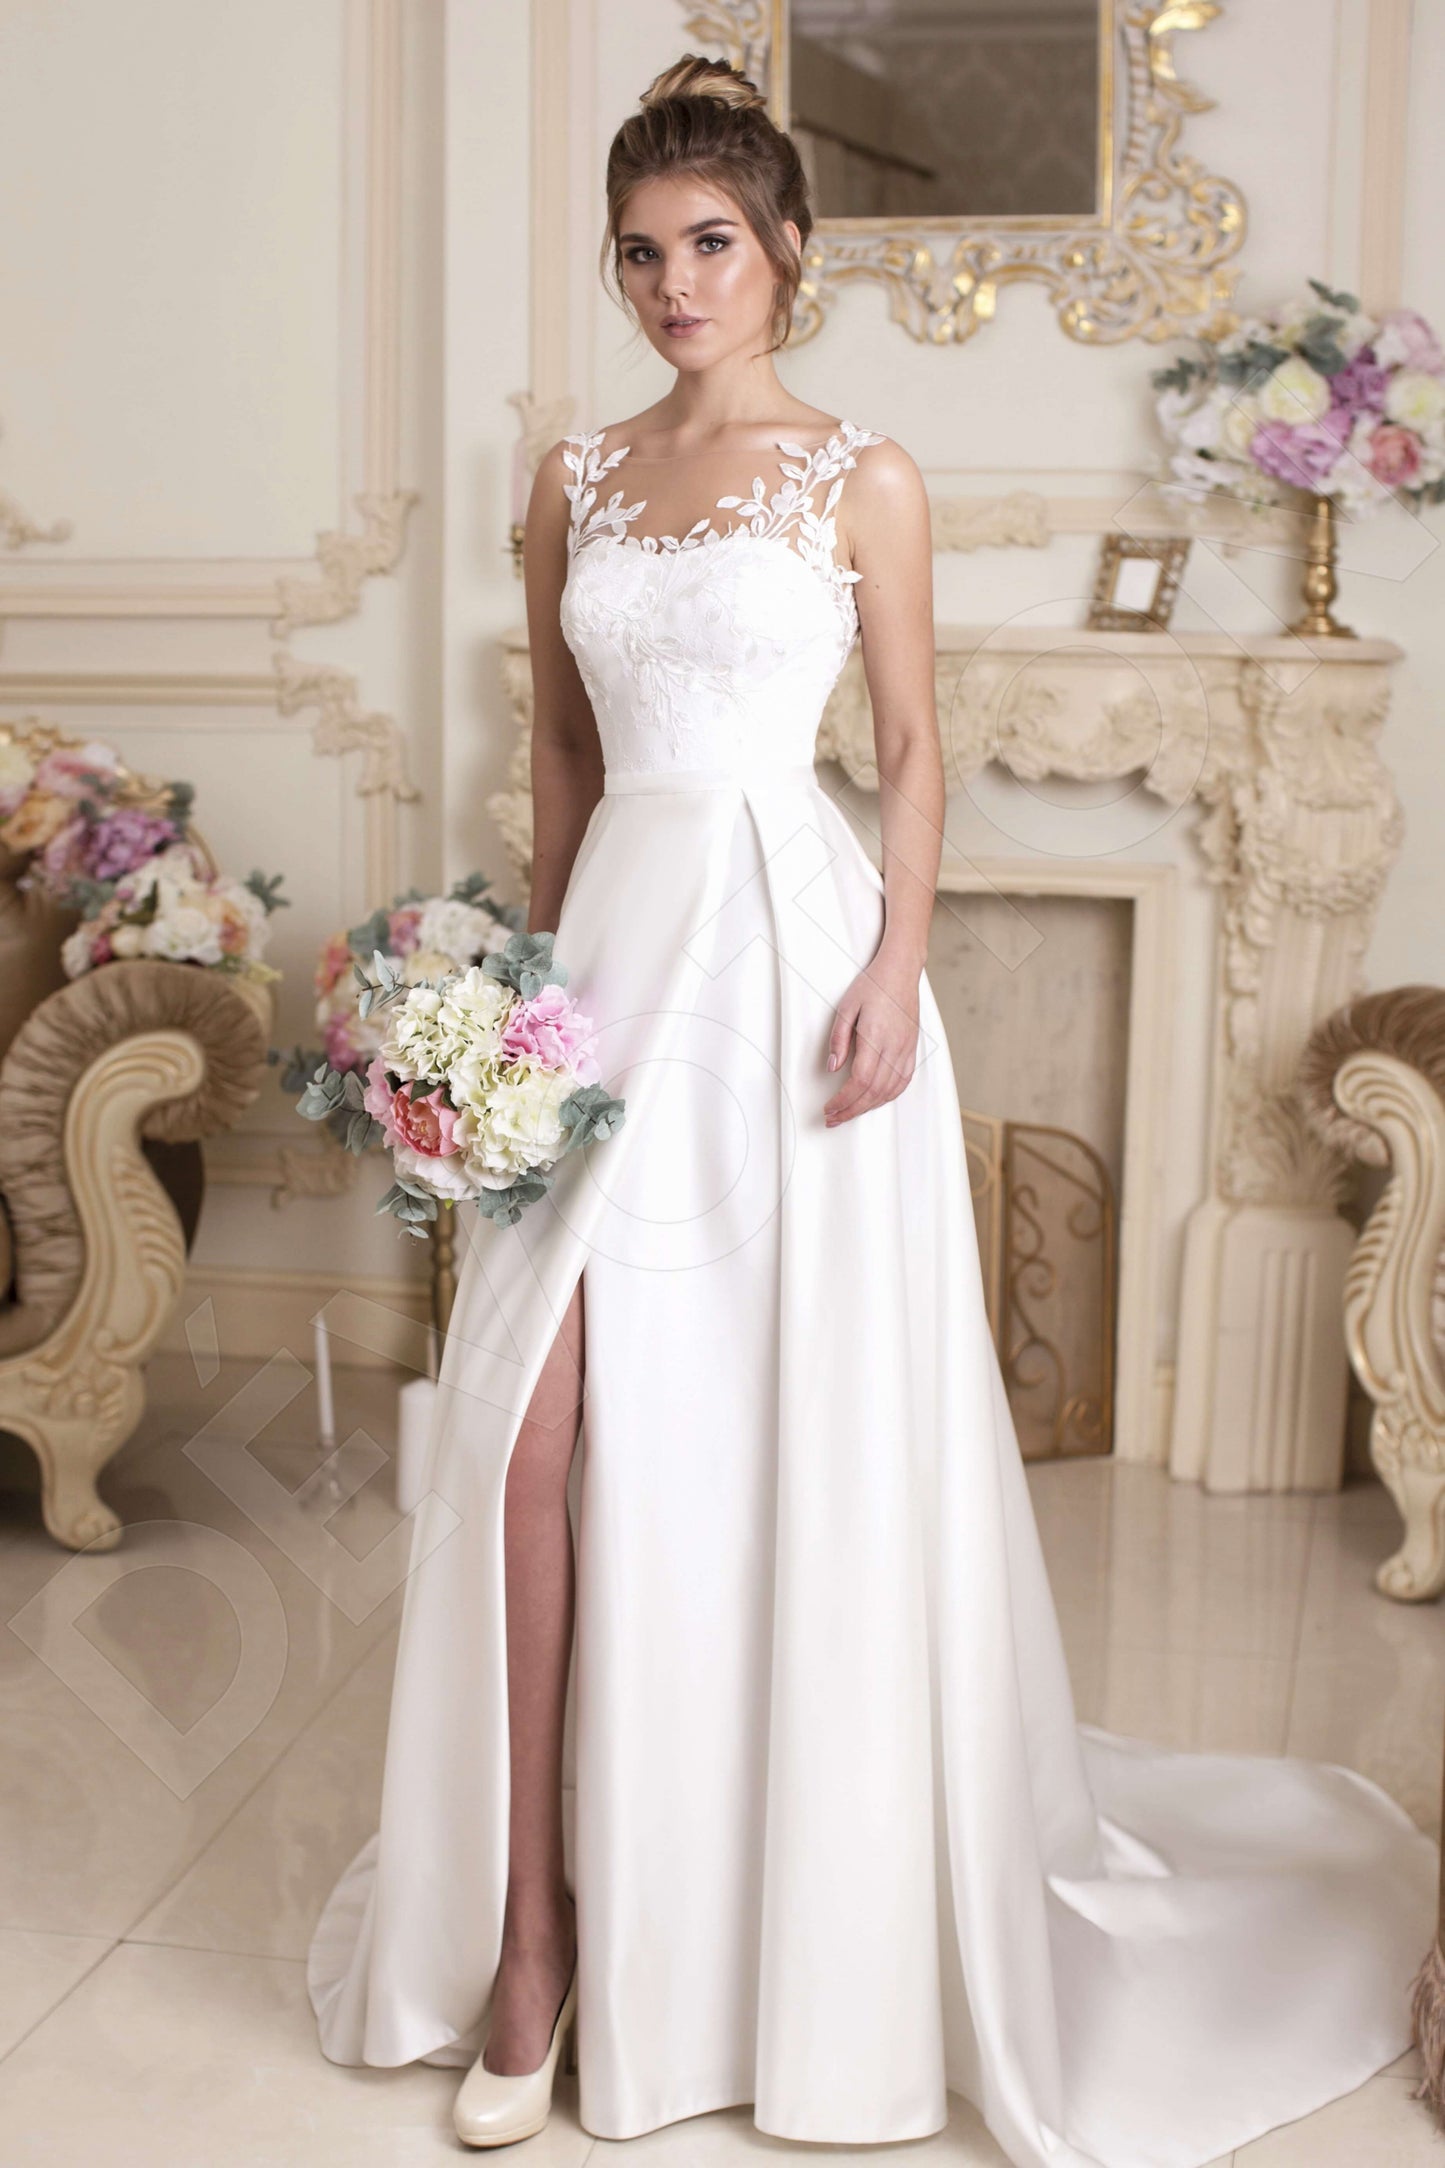 Dolores Full back A-line Sleeveless Wedding Dress Front